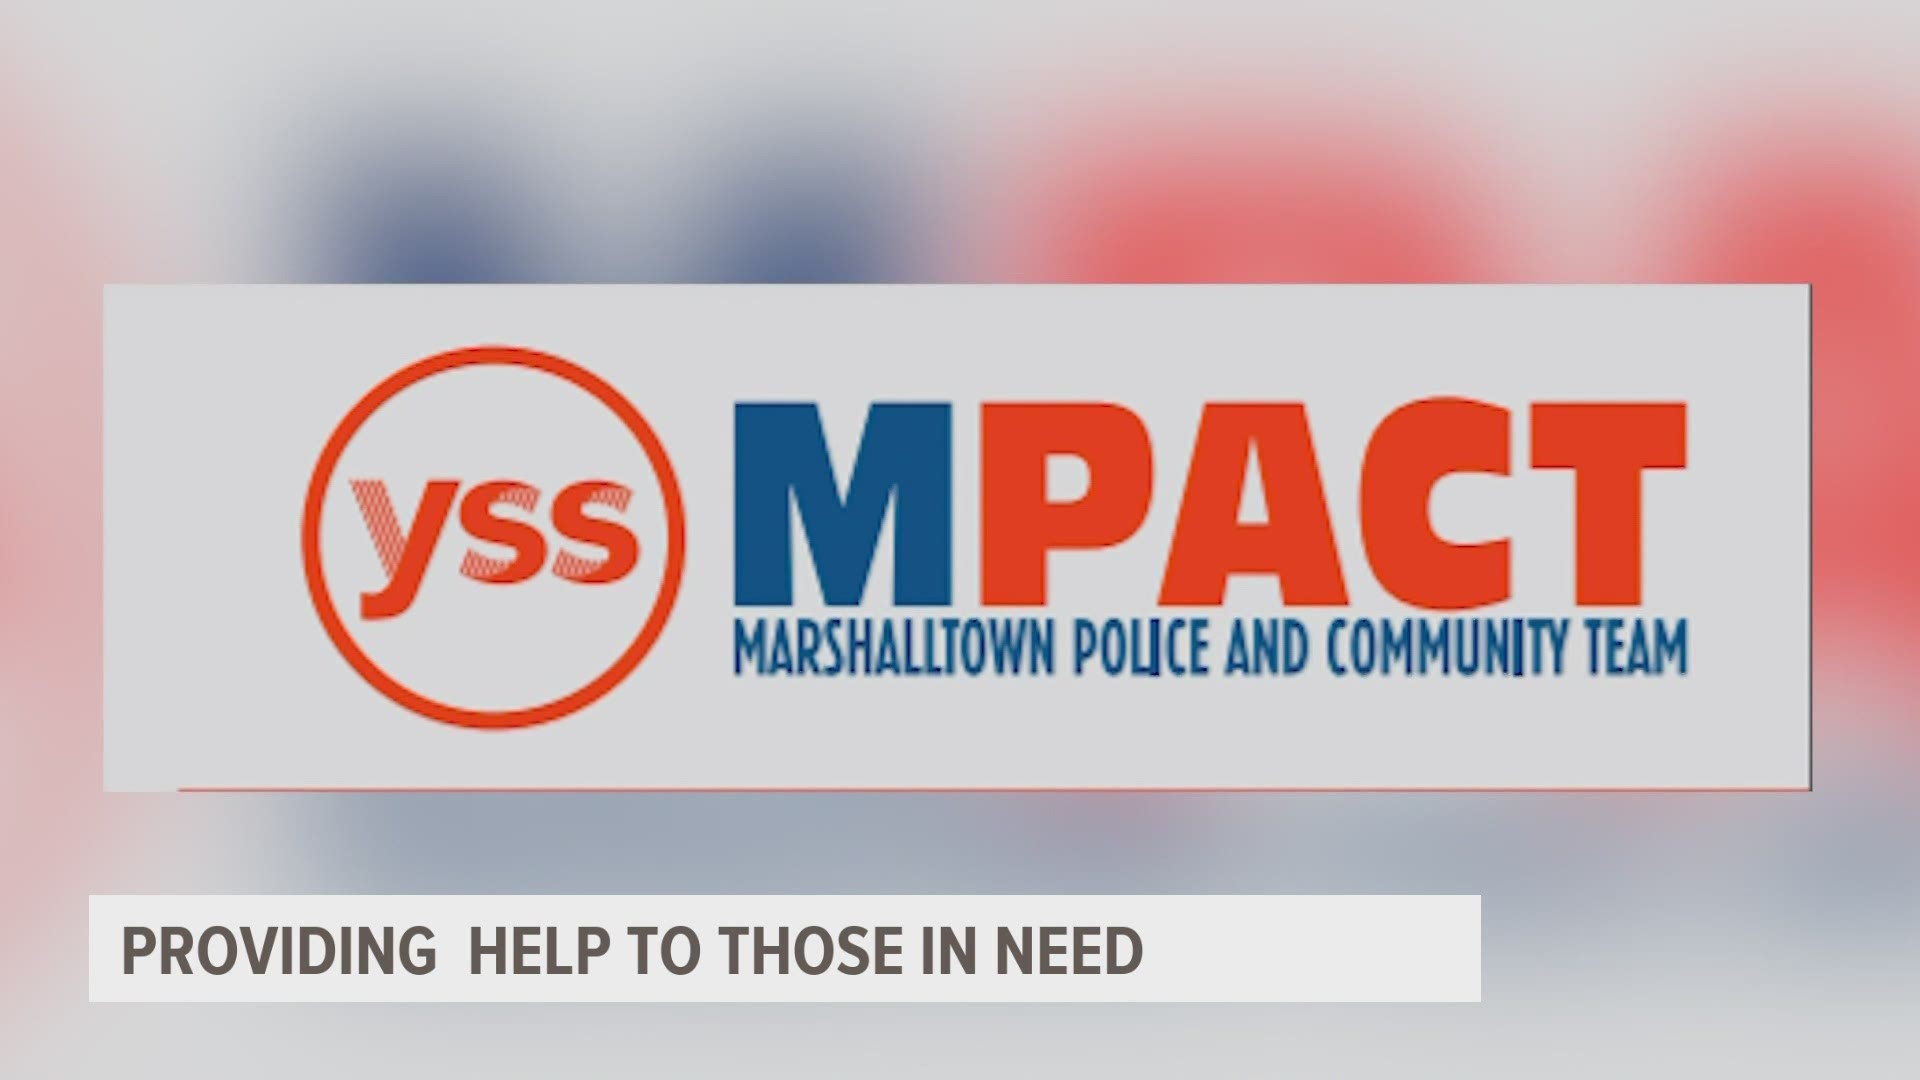 The MPACT program allows Marshalltown police to shift mental health calls to someone trained to handle those situations, like a community advocate.